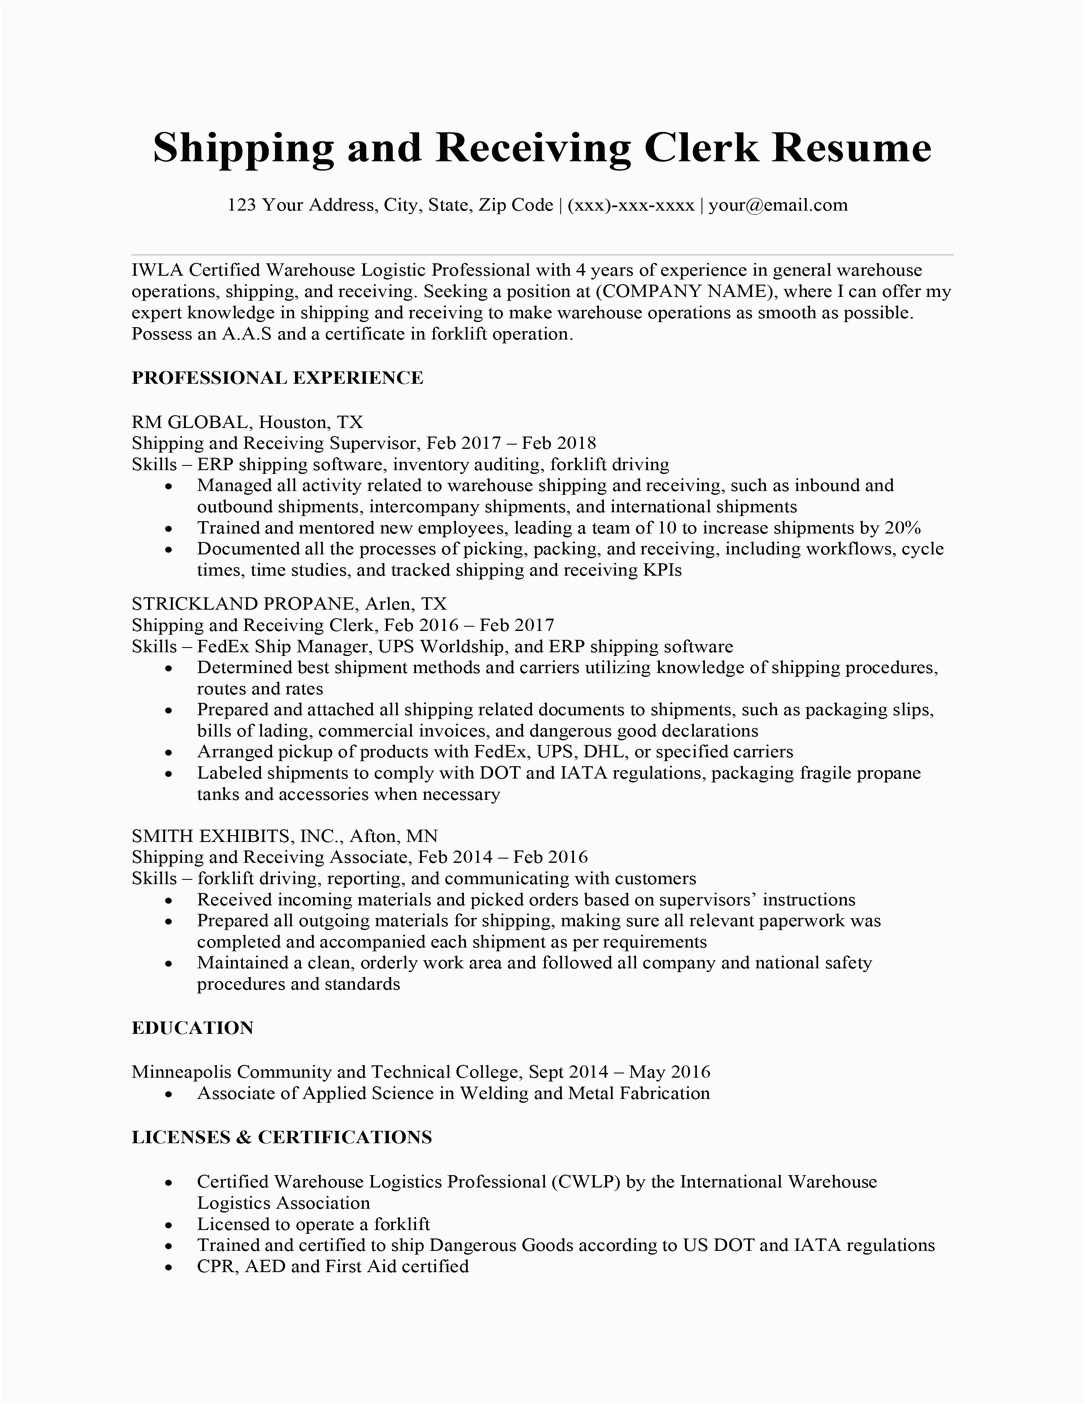 Shipping and Receiving Supervisor Resume Sample Shipping and Receiving Clerk Resume Sample & Writing Tips